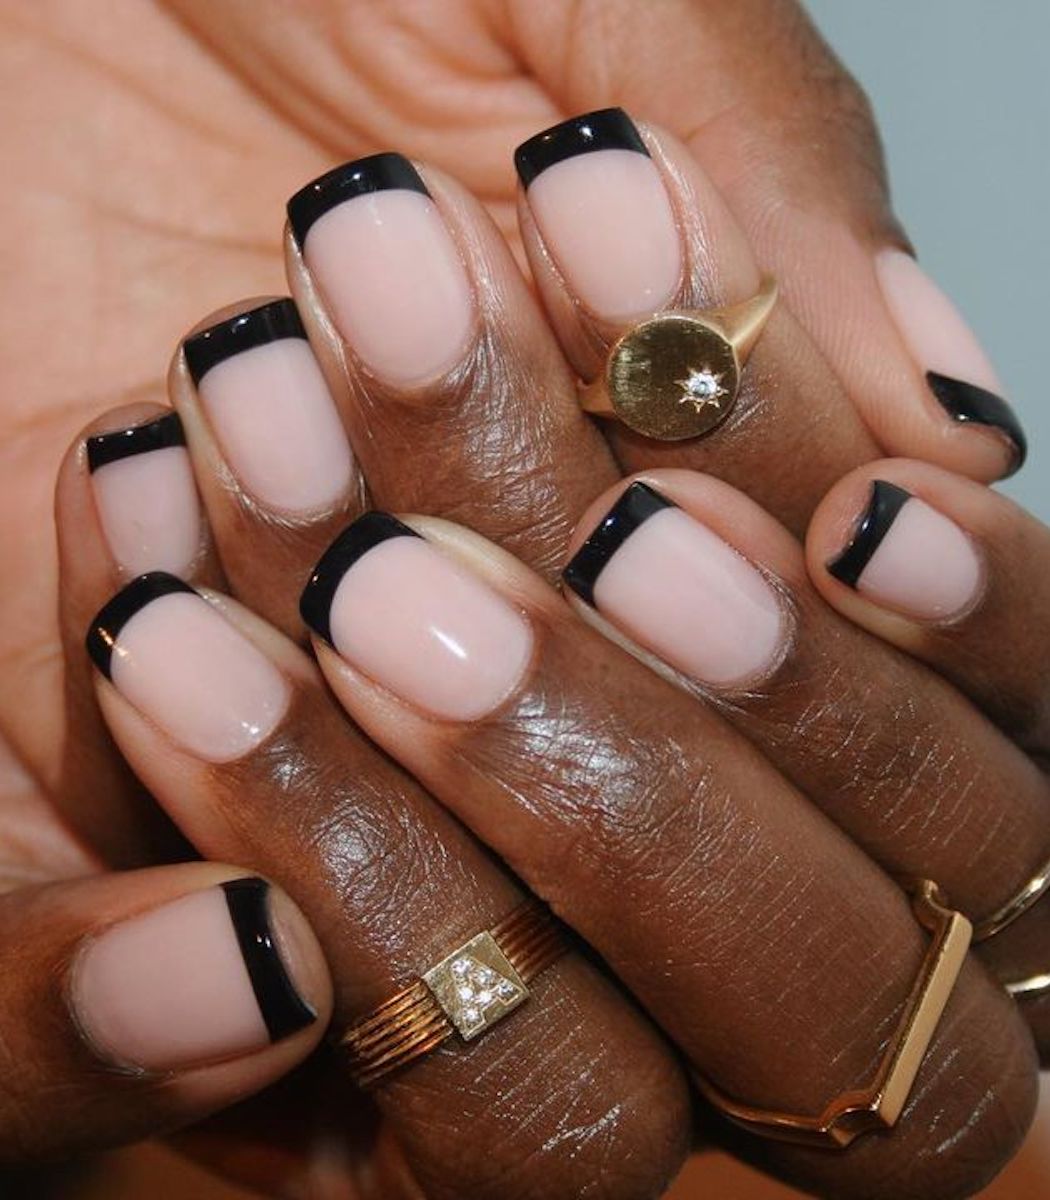 Colourful French manicures: Opposites Attract